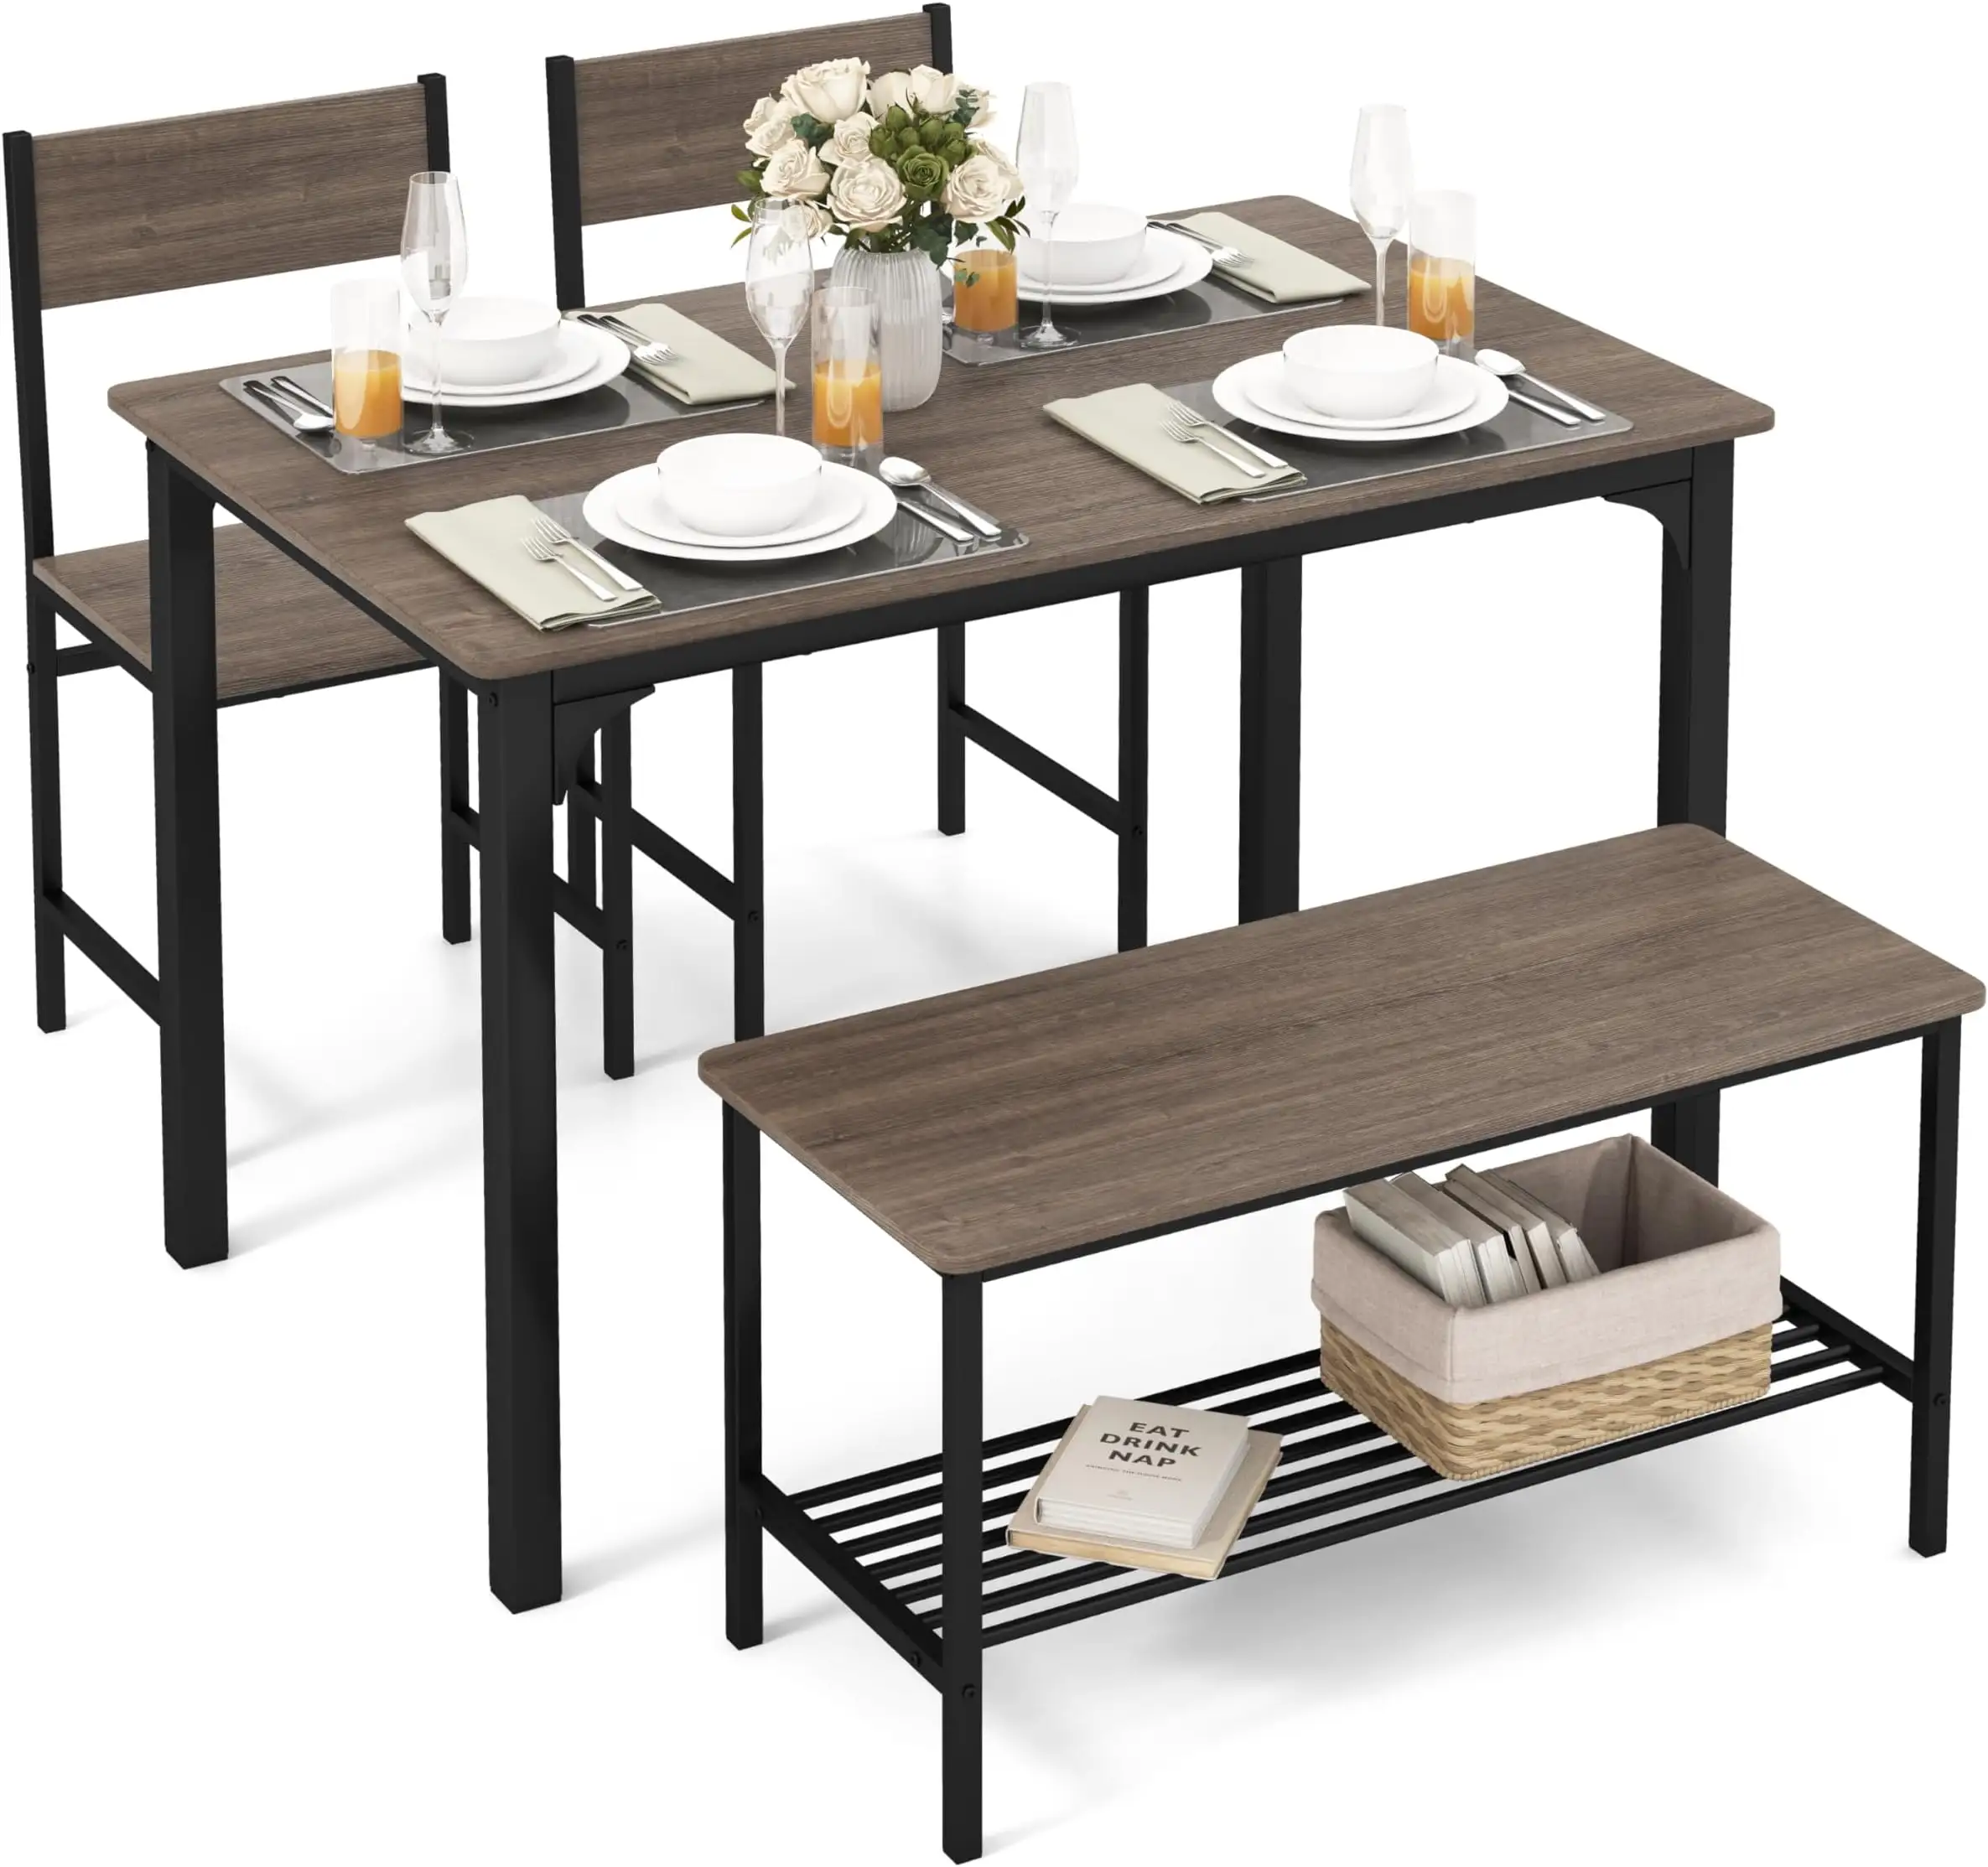 4-5 person metal support wooden dining table set with two chairs and one long chair apartment dining room